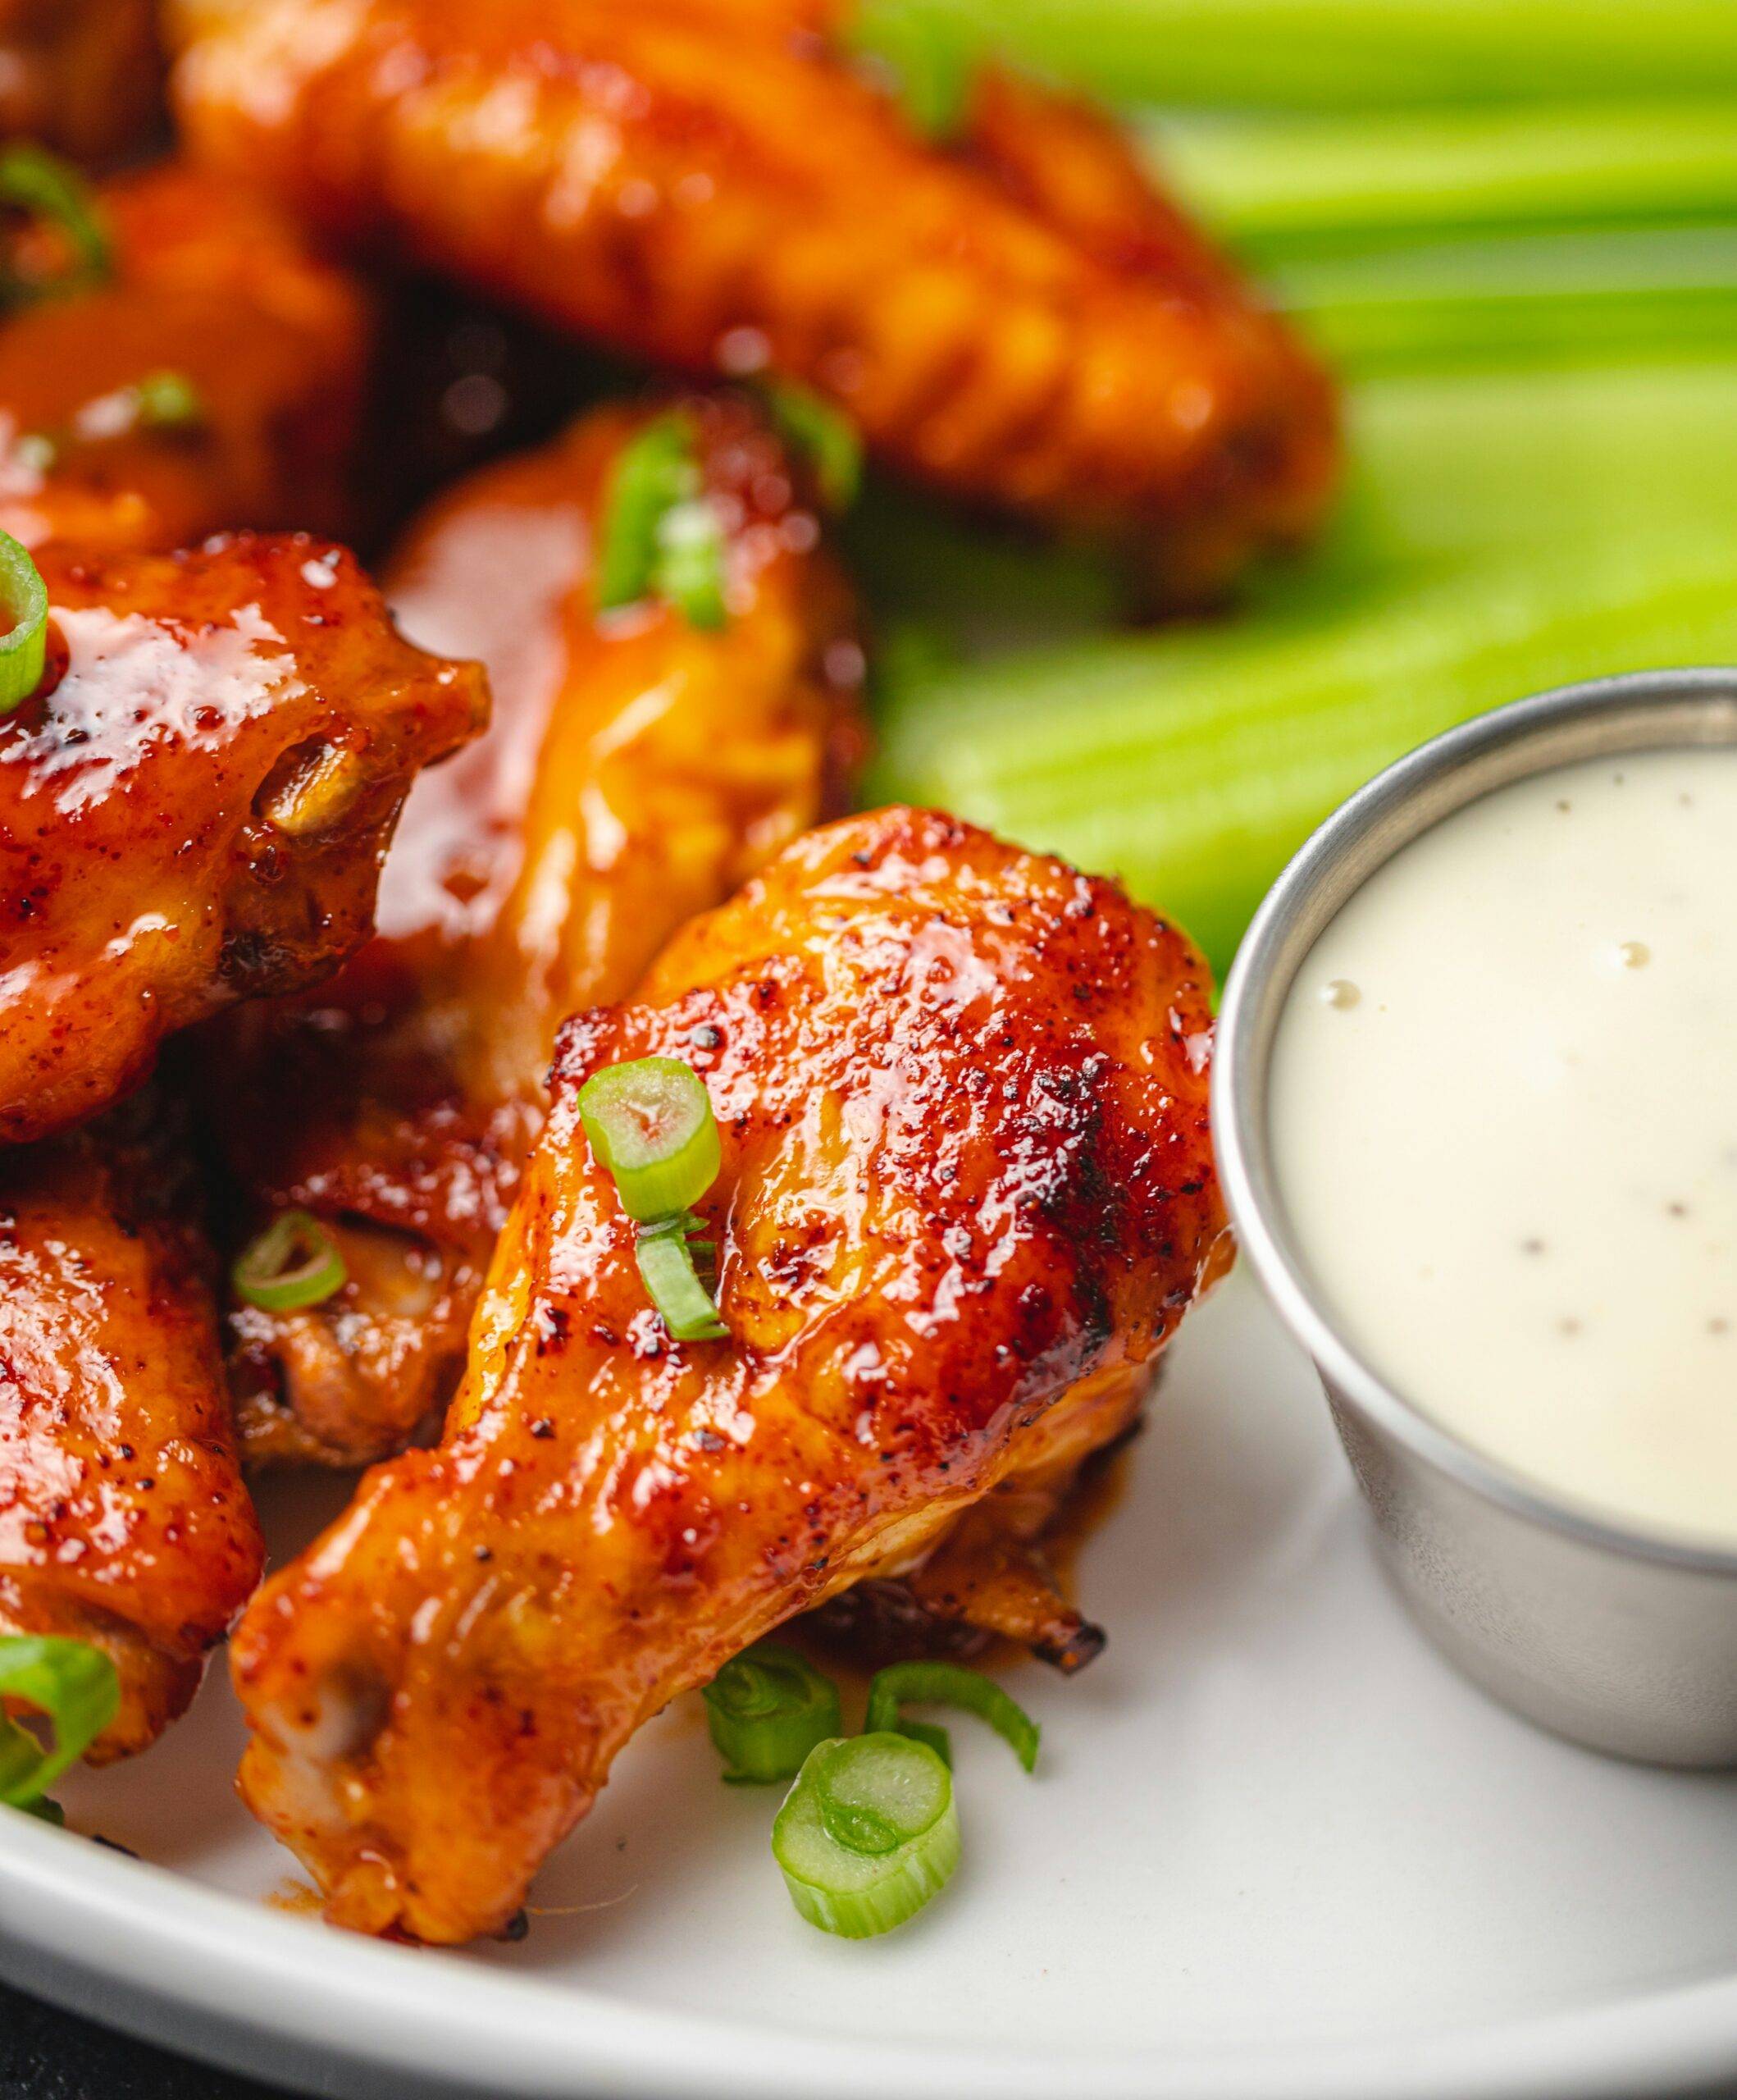 Explore The Exciting Origin of Buffalo Chicken Wings